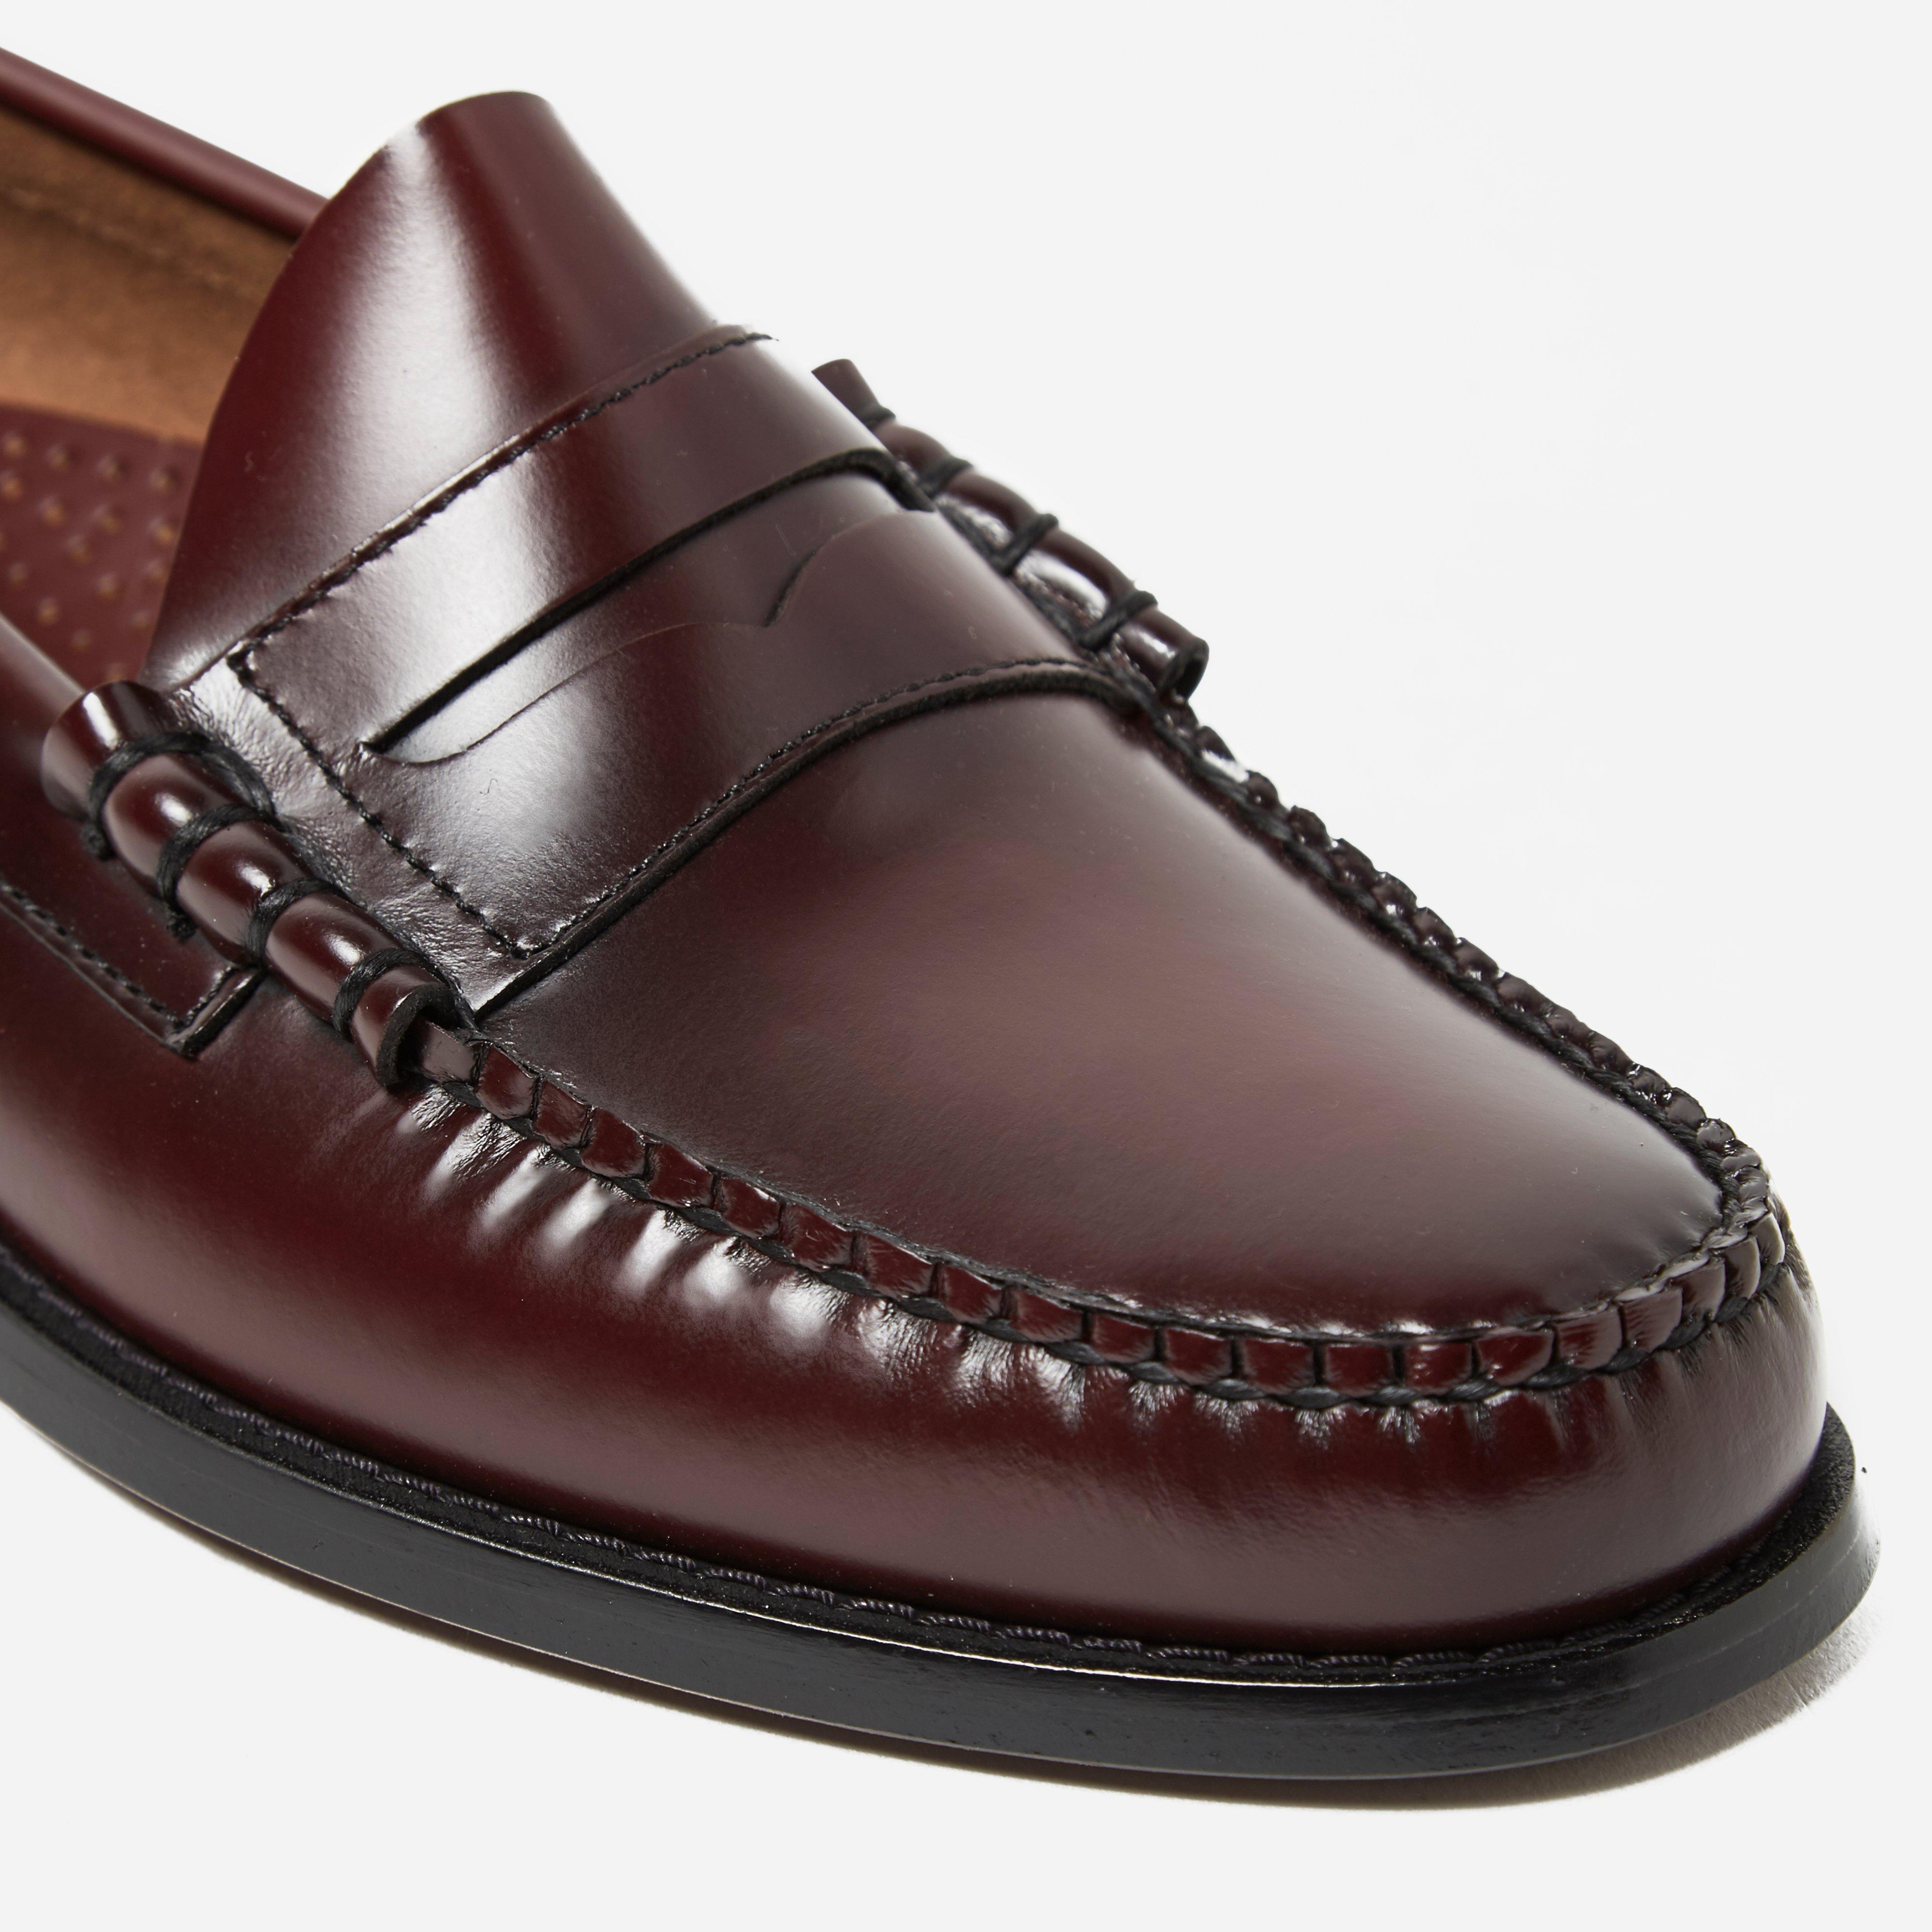 G.H.BASS Leather Bass Weejun Larson Penny Loafer in Burgundy (Brown ...